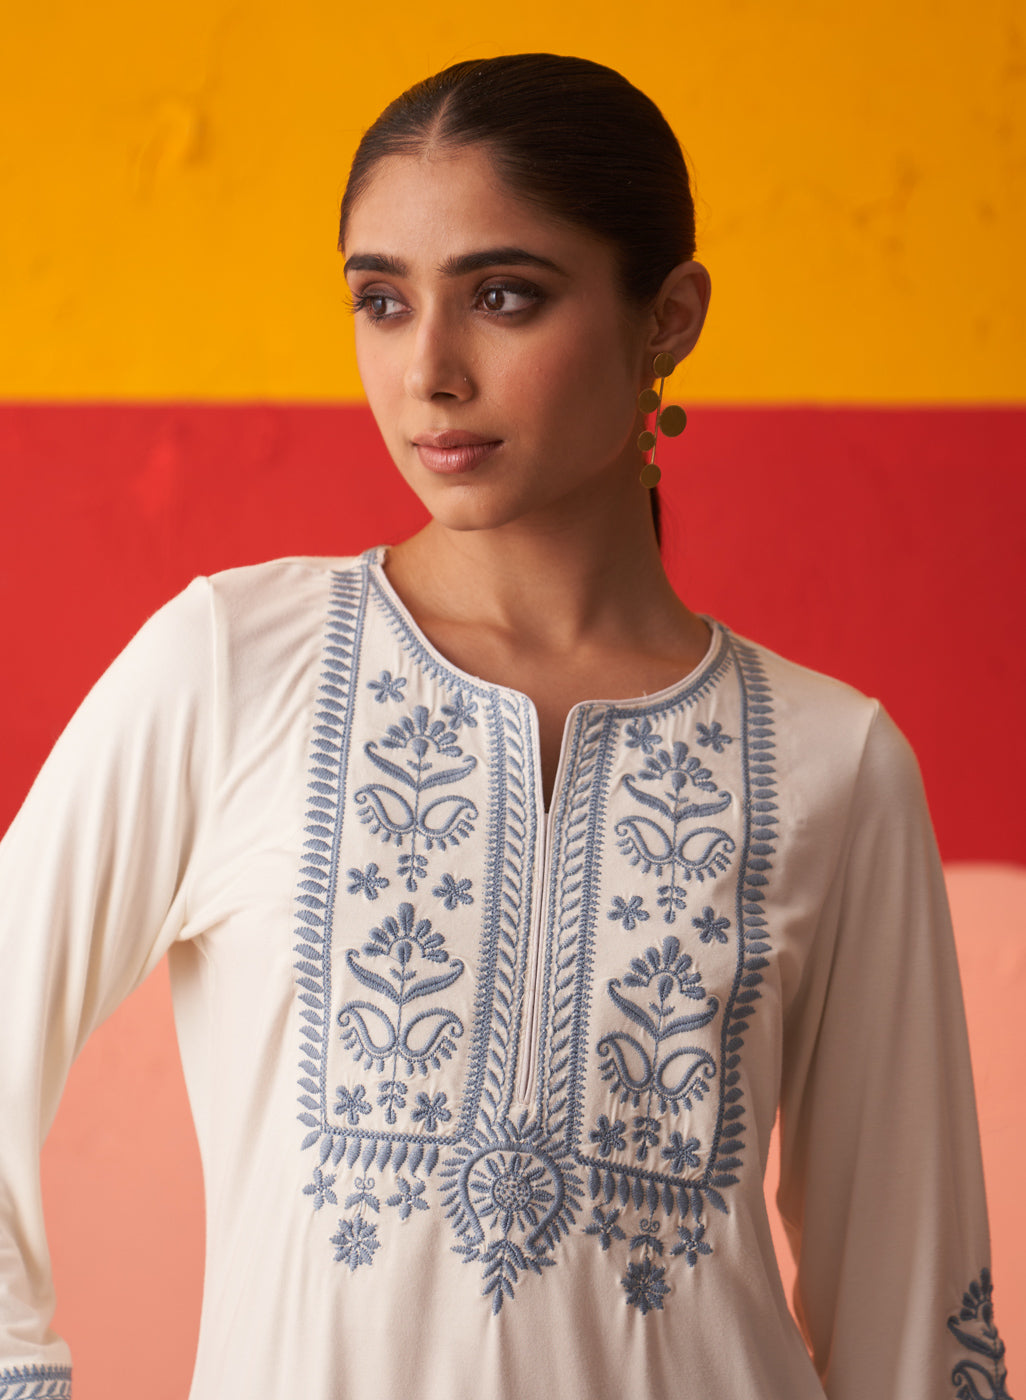 White Kurta for Women with Threadwork and Lace Detailing